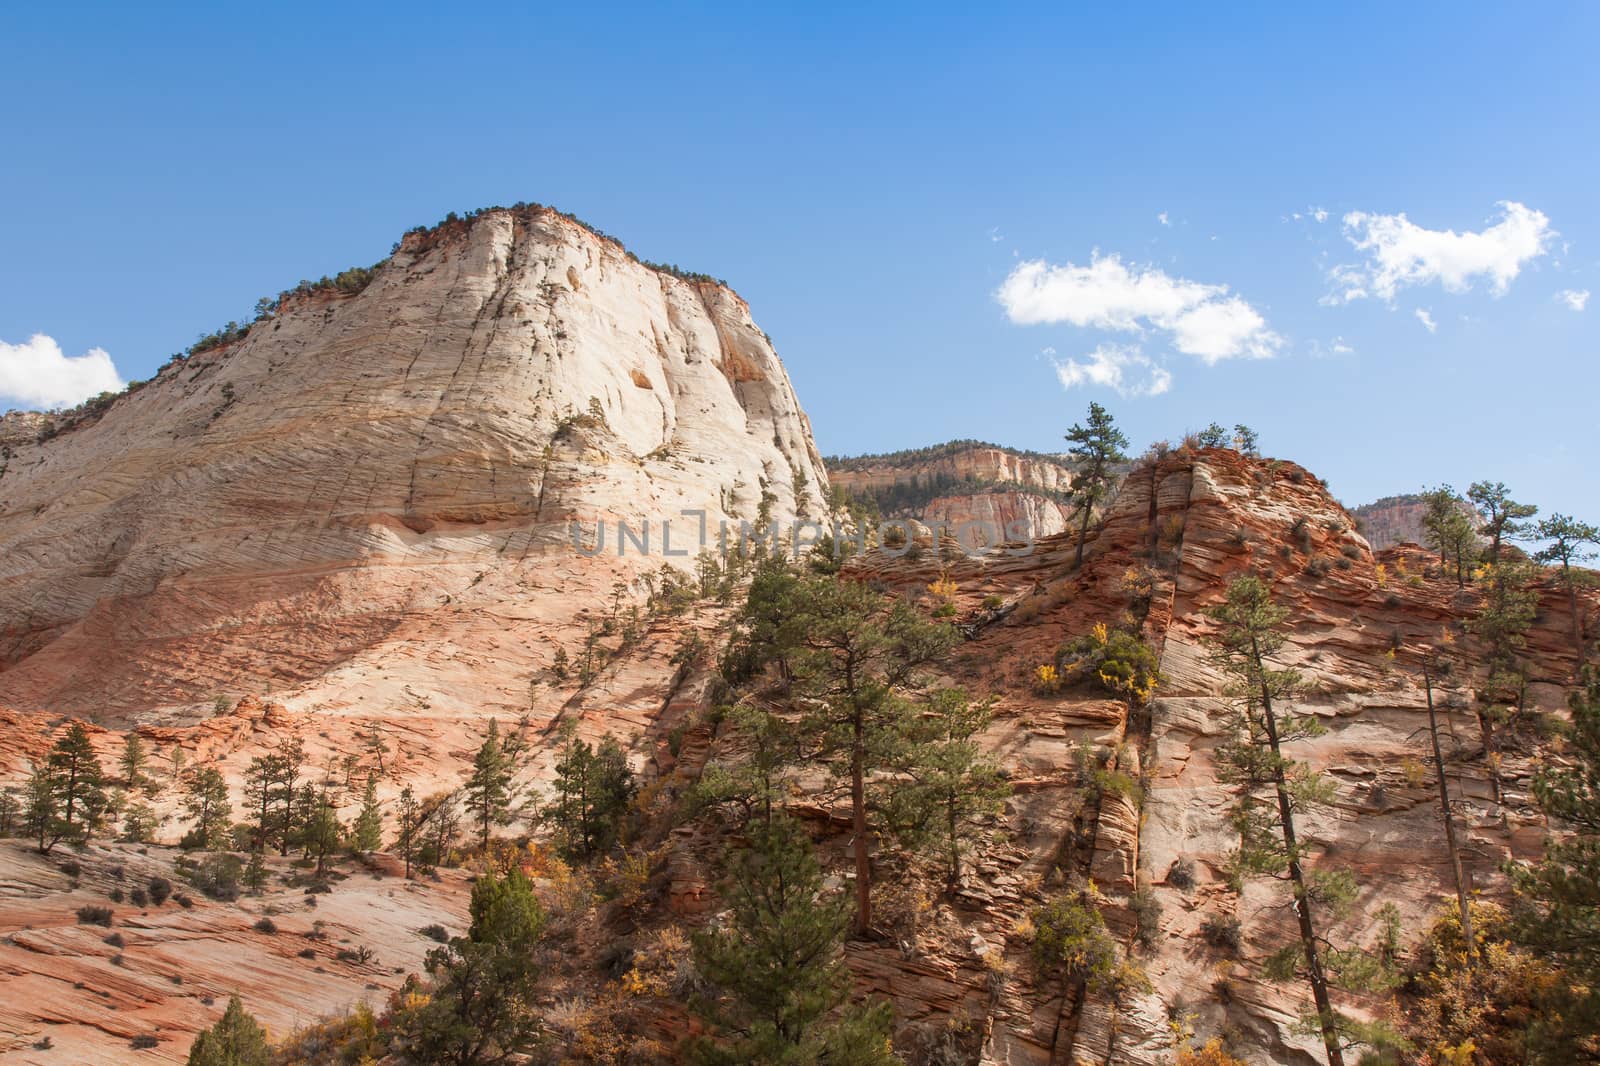 This scene is from the upper plateau region of Zion National Park. Hiking opportunities galore are plentiful throughout this area.